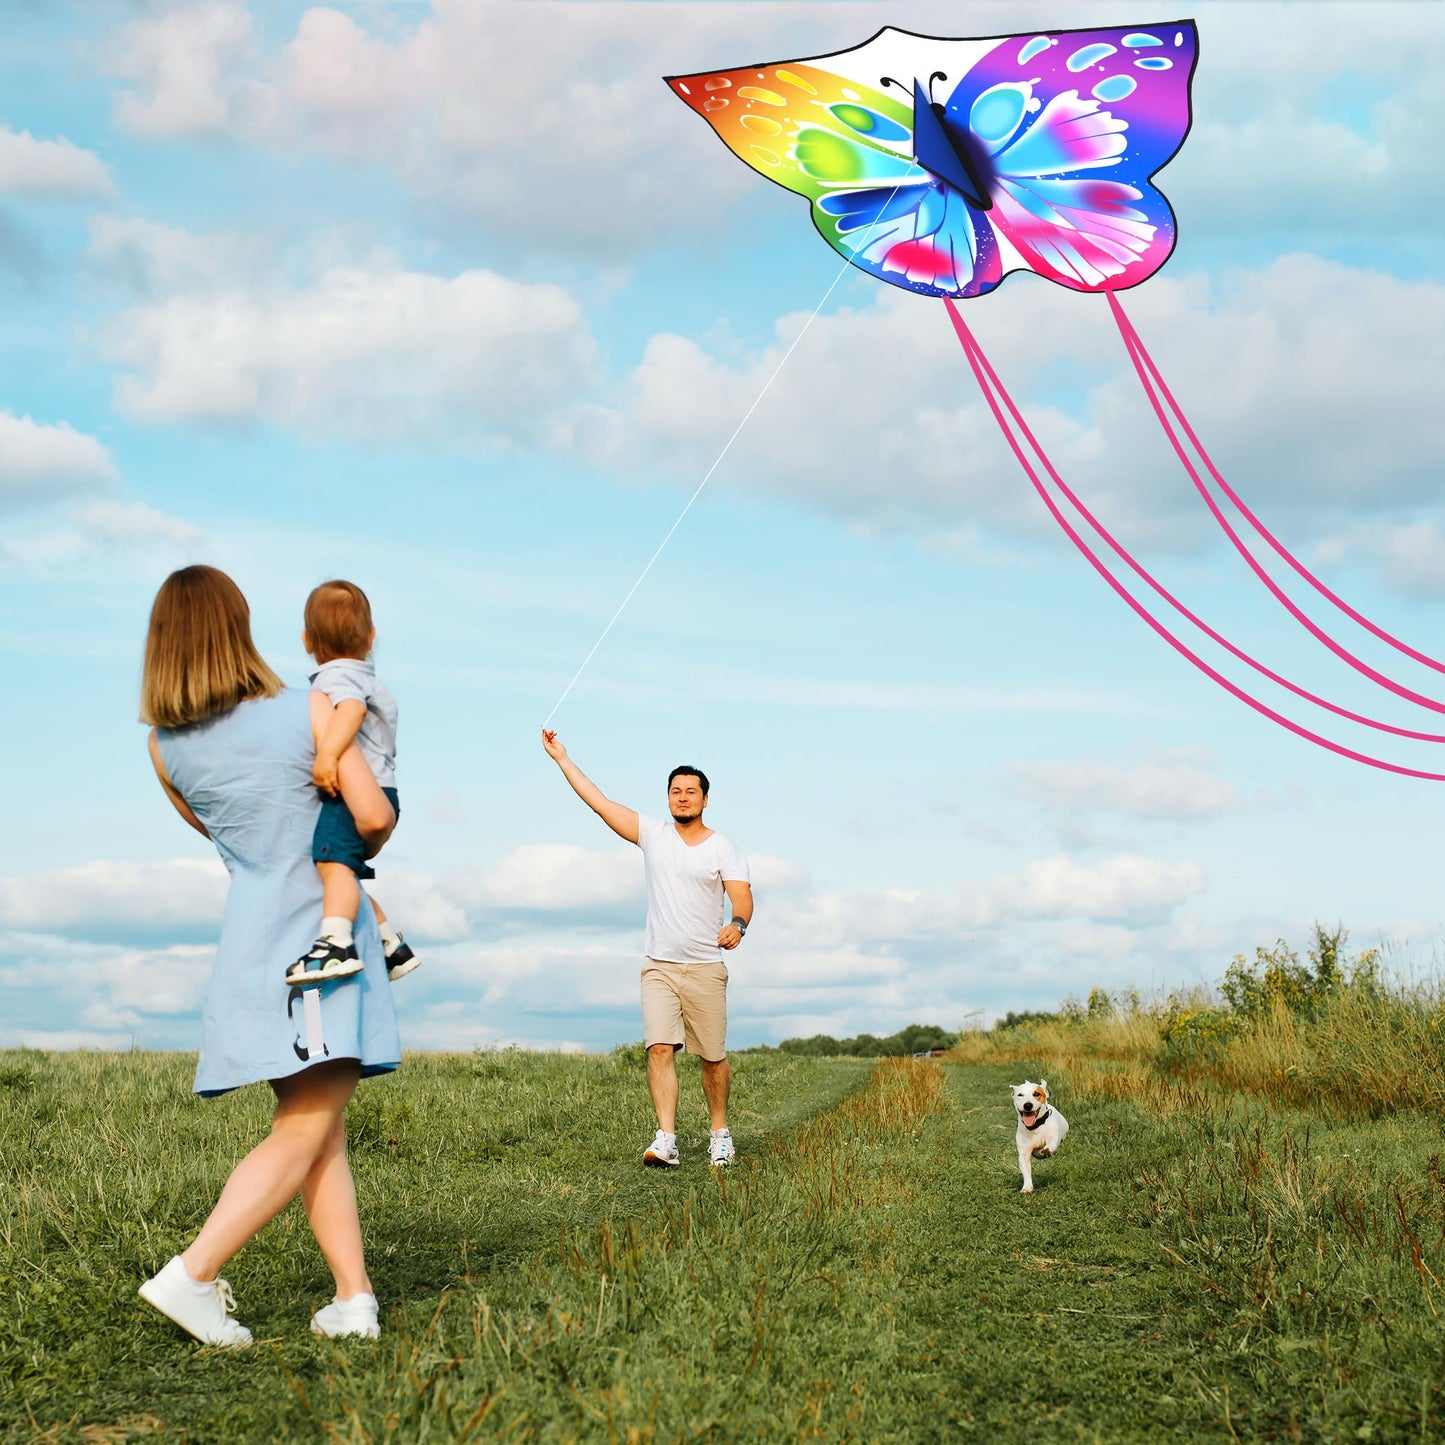 Crogift Butterfly Kites for Adults Easy to Fly for Polyester Beginner Kite for kids Ages 4-8 8-12(Colorful)